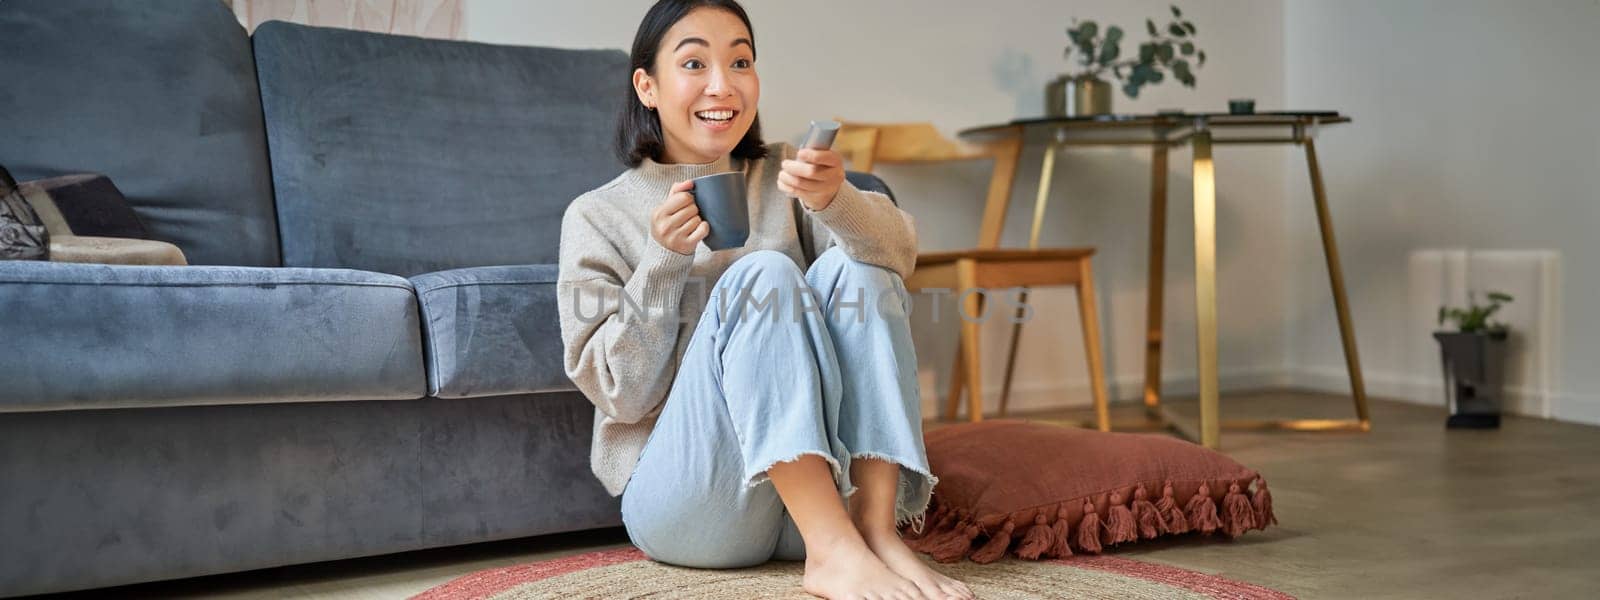 Portrait of girl watching television at home, sits on floor near sofa, holds remote and changes channels.